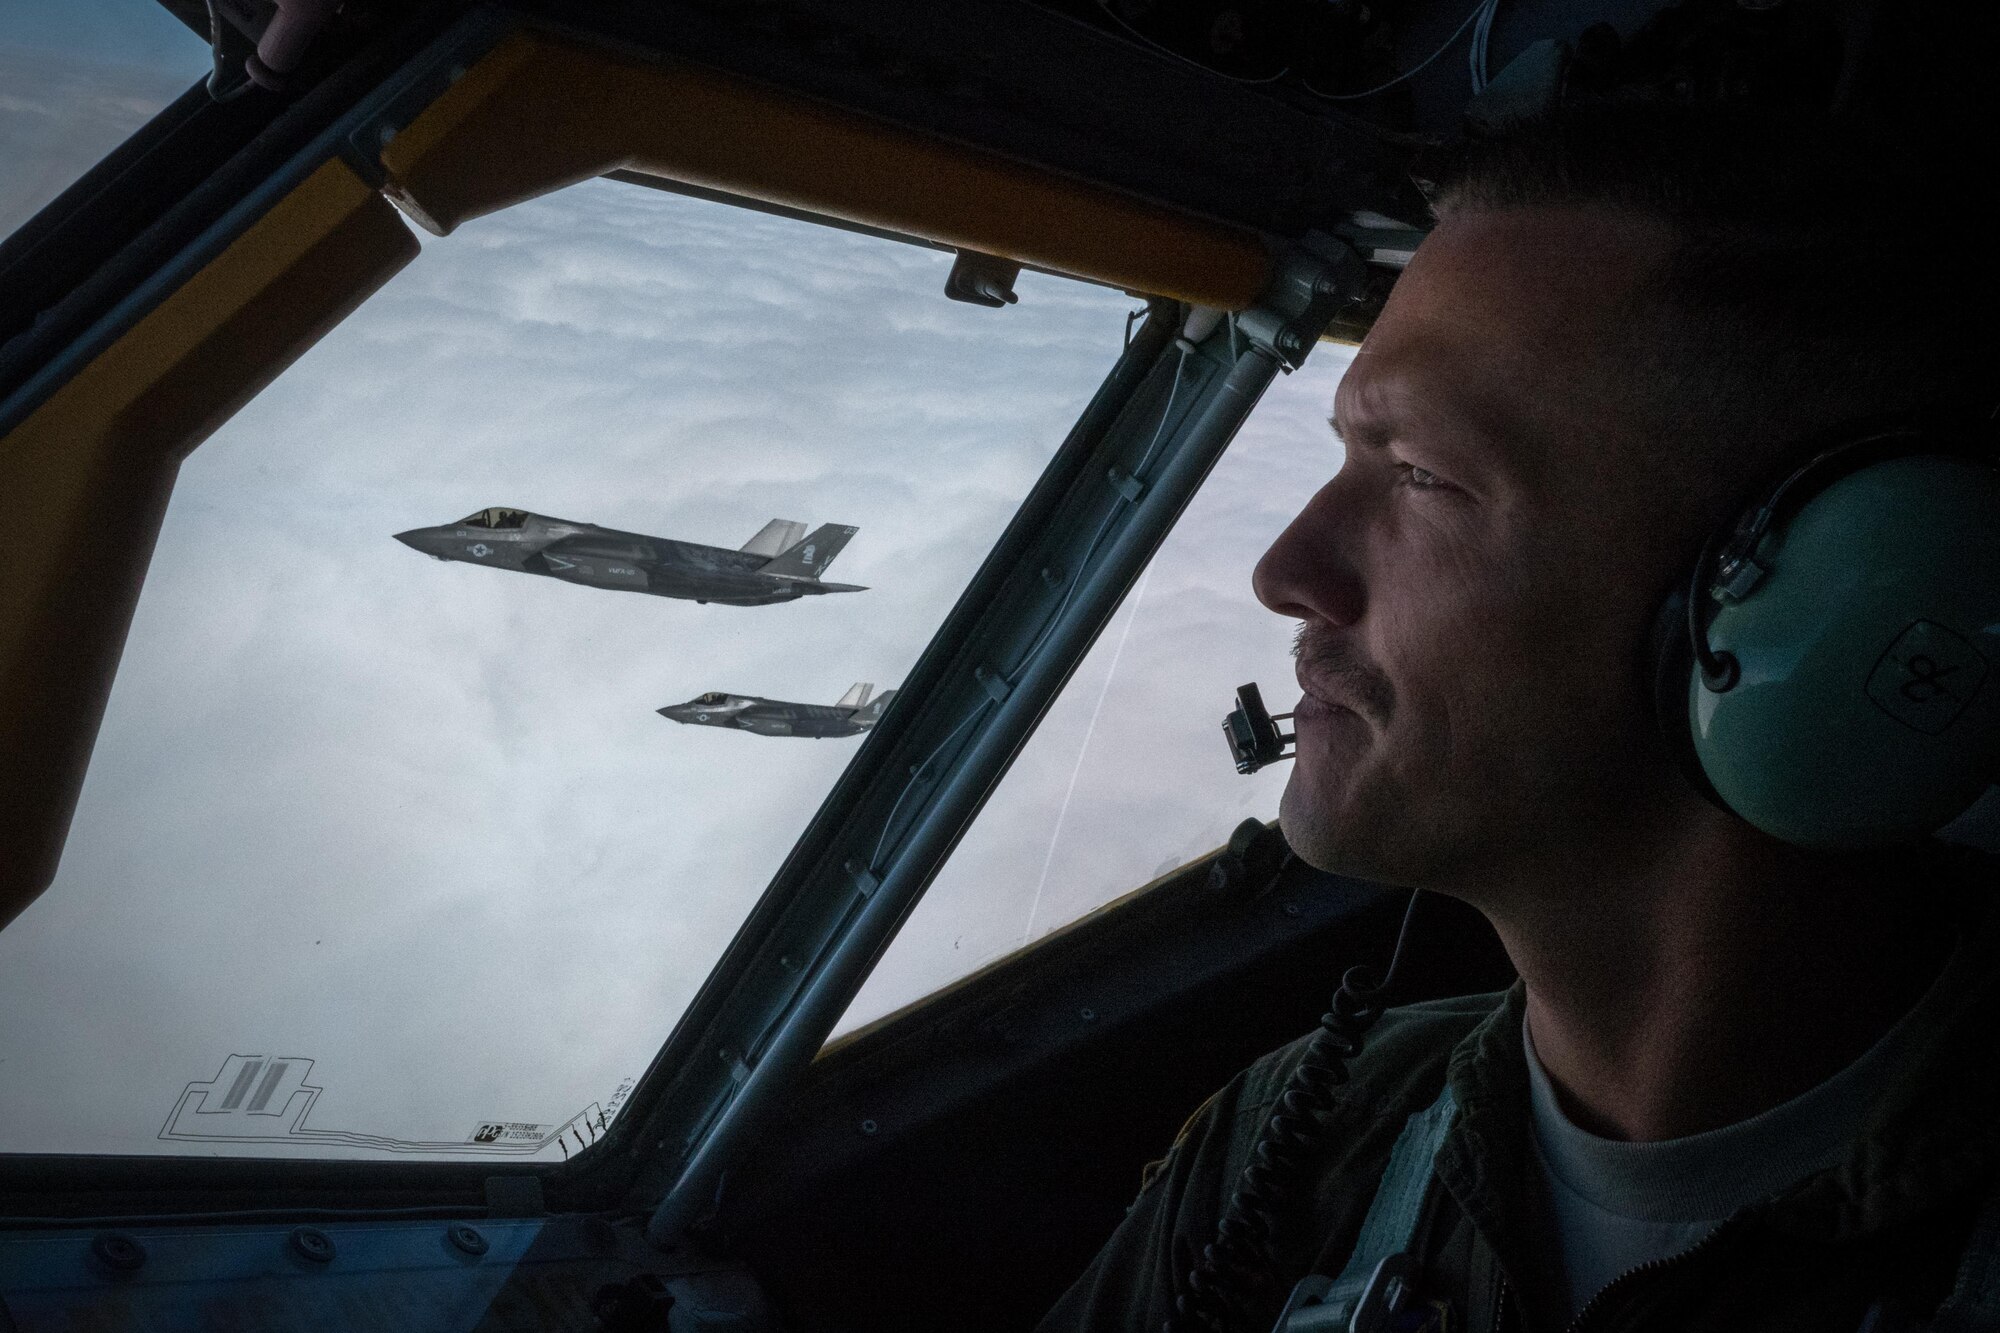 Capt. Matt Davis, 909th Air Refueling Squadron KC-135 Stratotanker pilot, flies in formation with U.S. Marine Corps F-35B Lightning IIs from Marine Fighter Attack Squadron 121, March 14, 2017, over the Pacific Ocean. The training sortie marked the first air refueling mission with F-35s in the 909th ARS’s area of operation. (U.S. Air Force photo by Senior Airman John Linzmeier)